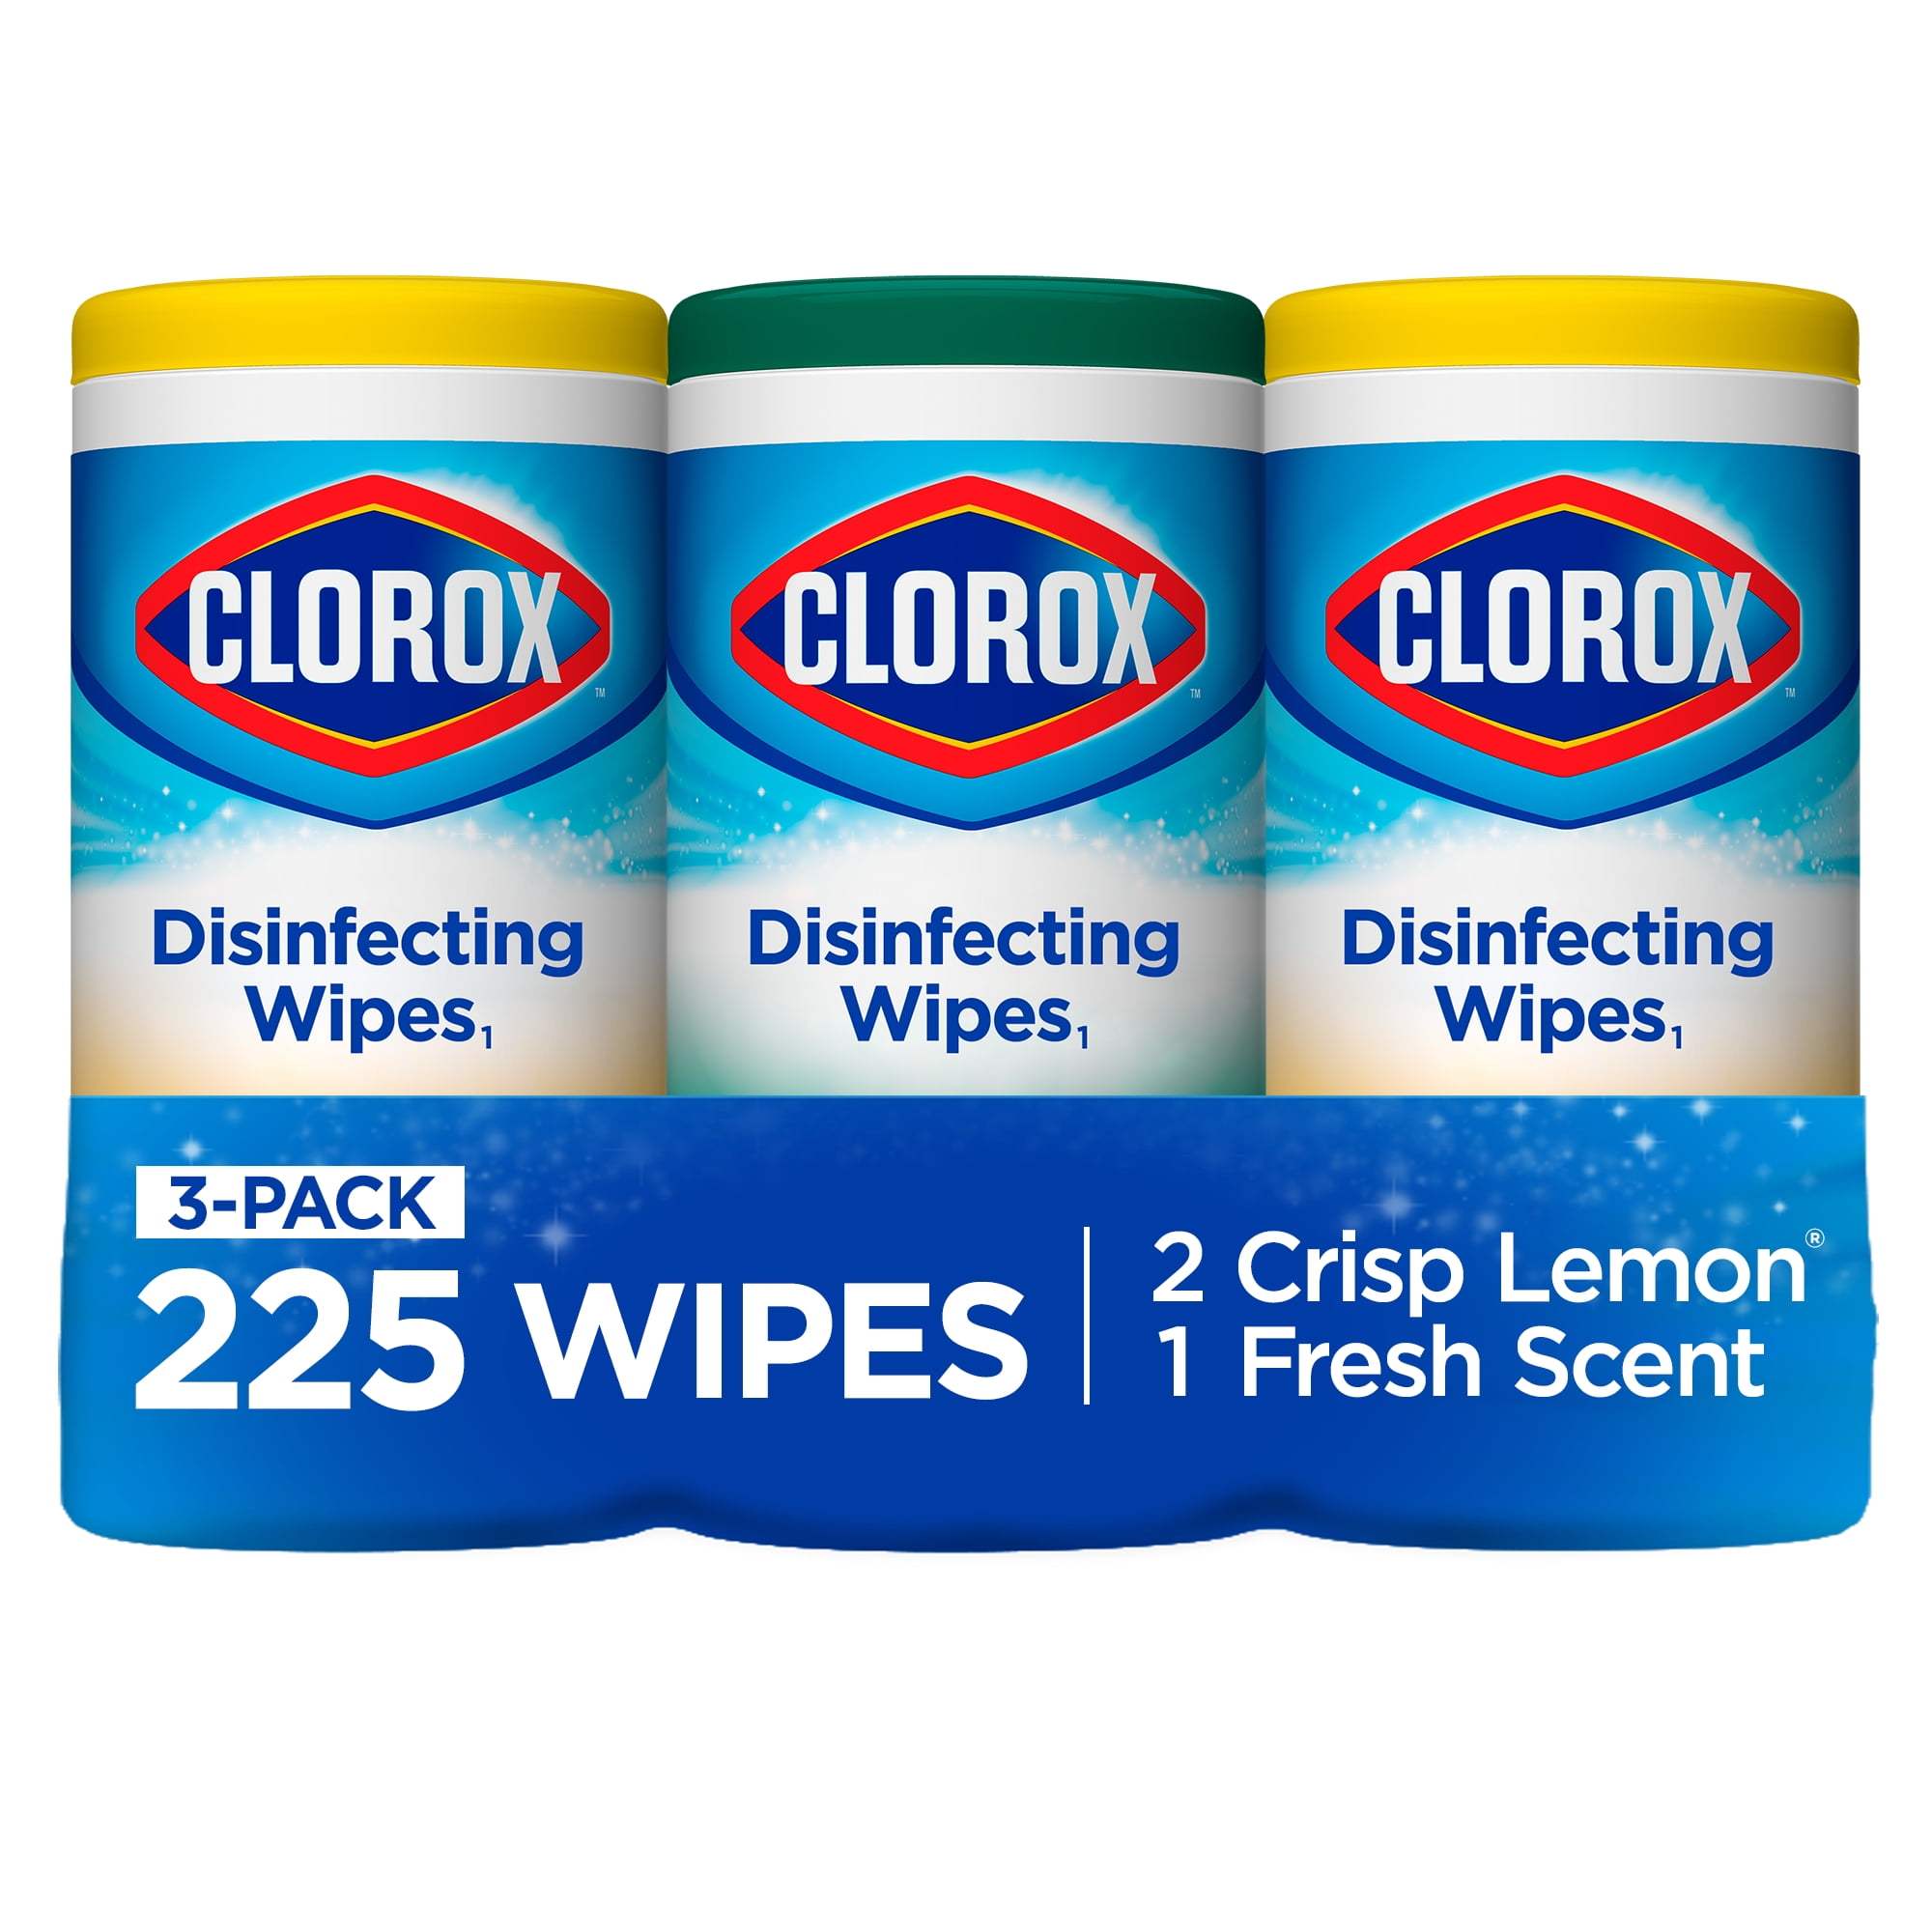 Clorox Disinfecting Wipes 225 Count Value Pack Crisp Lemon And